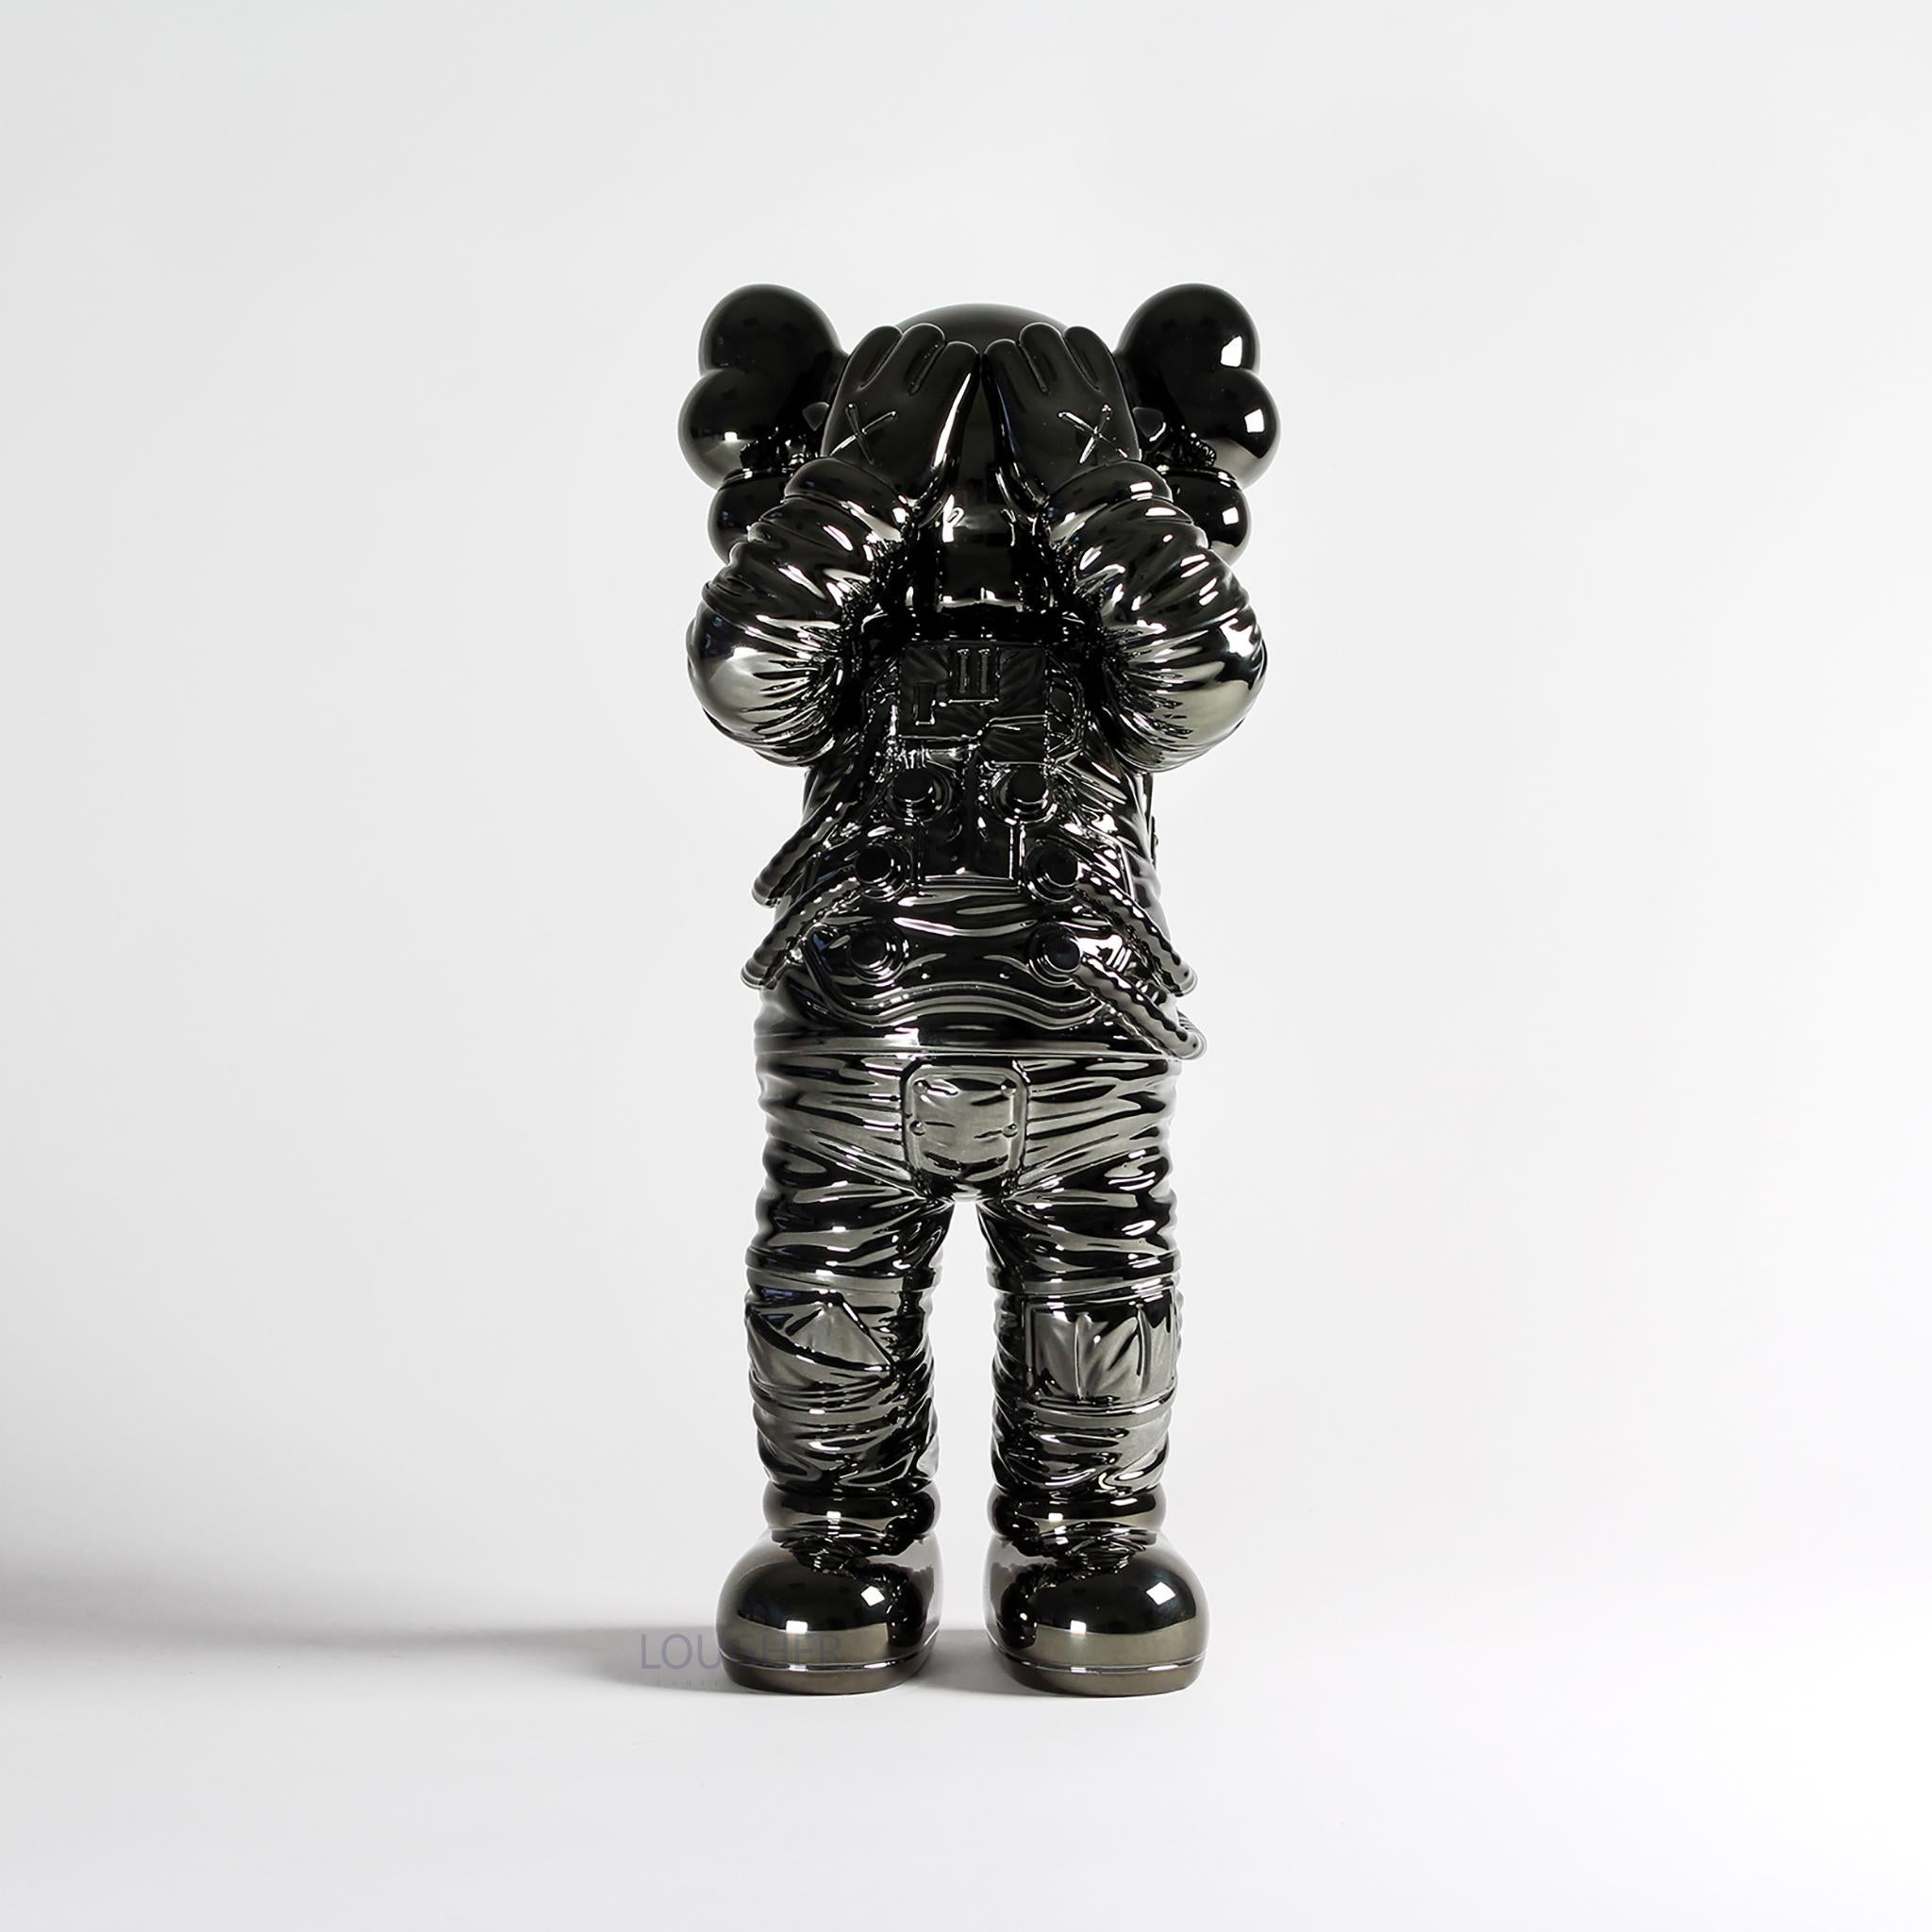 KAWS Figurative Sculpture - Holiday Space (Black)